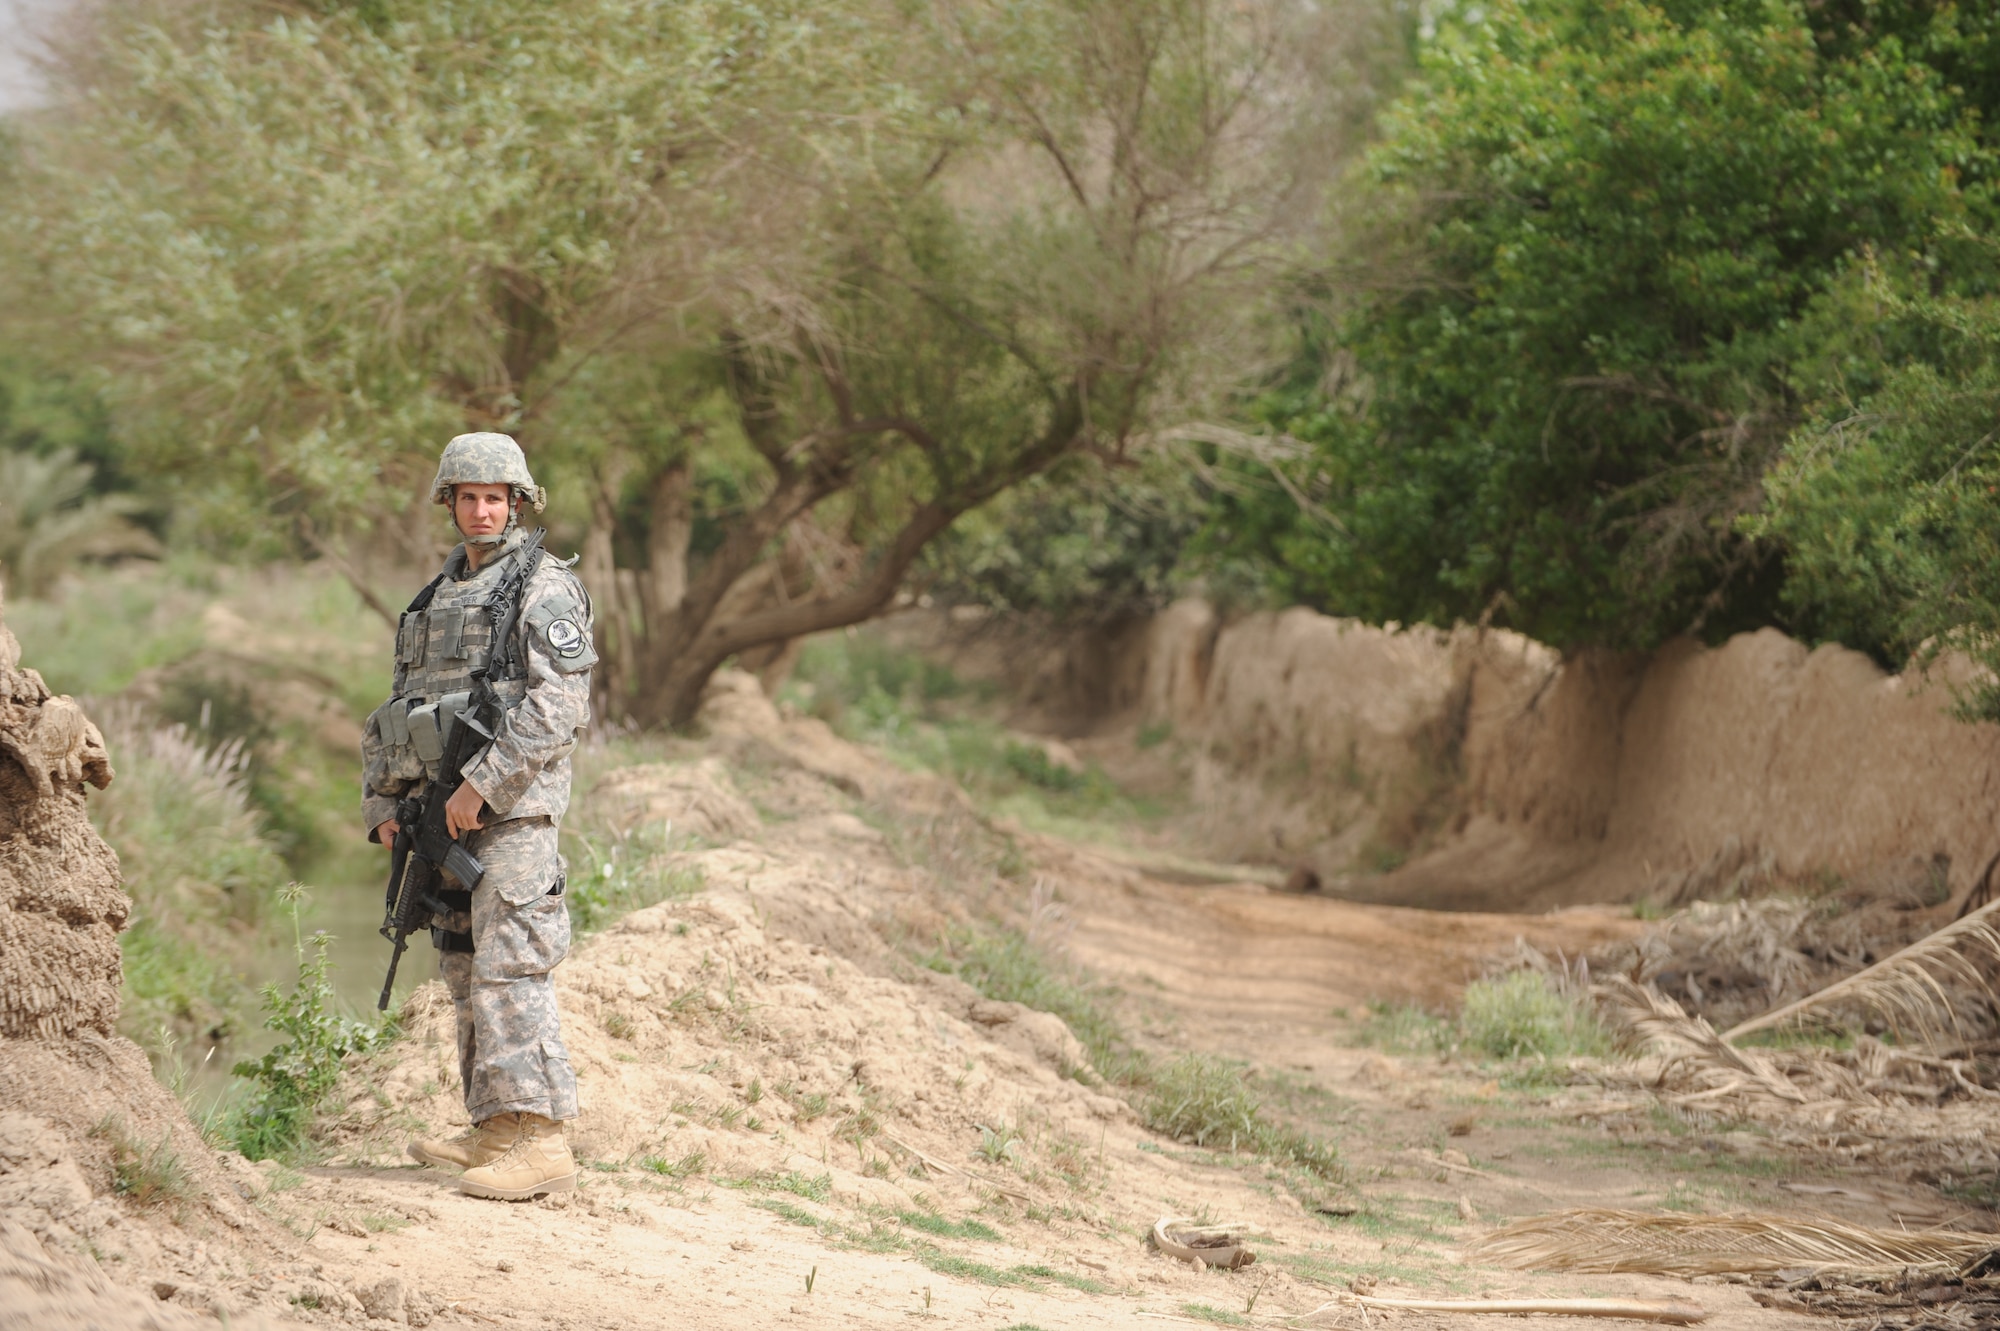 U.S. Air Force Airman 1st Class Daniel Cooper, 532nd Security Forces Squadron, Joint Base Balad, Iraq, conducts security during a patrol in Bakr village, Iraq, April 9, 2009, in support of Operation Iraqi Freedom.  (U.S. Air Force photo by Staff Sgt. James L. Harper Jr.)